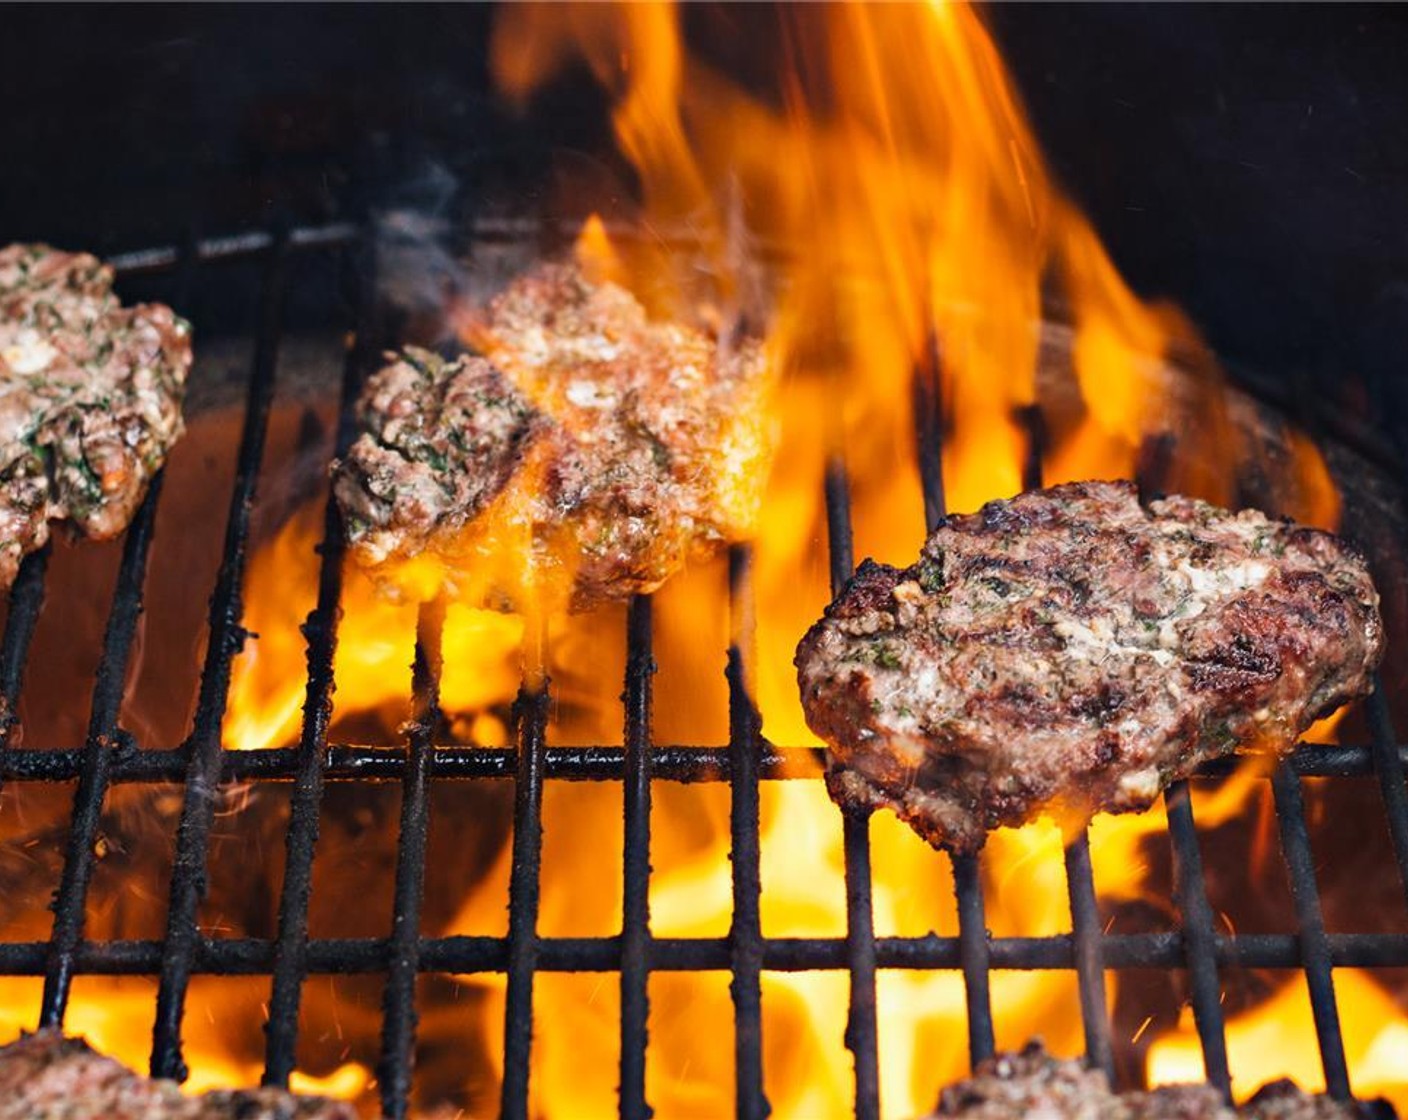 step 7 Heat your grill to medium high heat. Put the patties on the grill and cook uncovered for 5 minutes. Flip when necessary and cook for another 5 minutes-do not press the patties as they cook or you will loose all the juices!